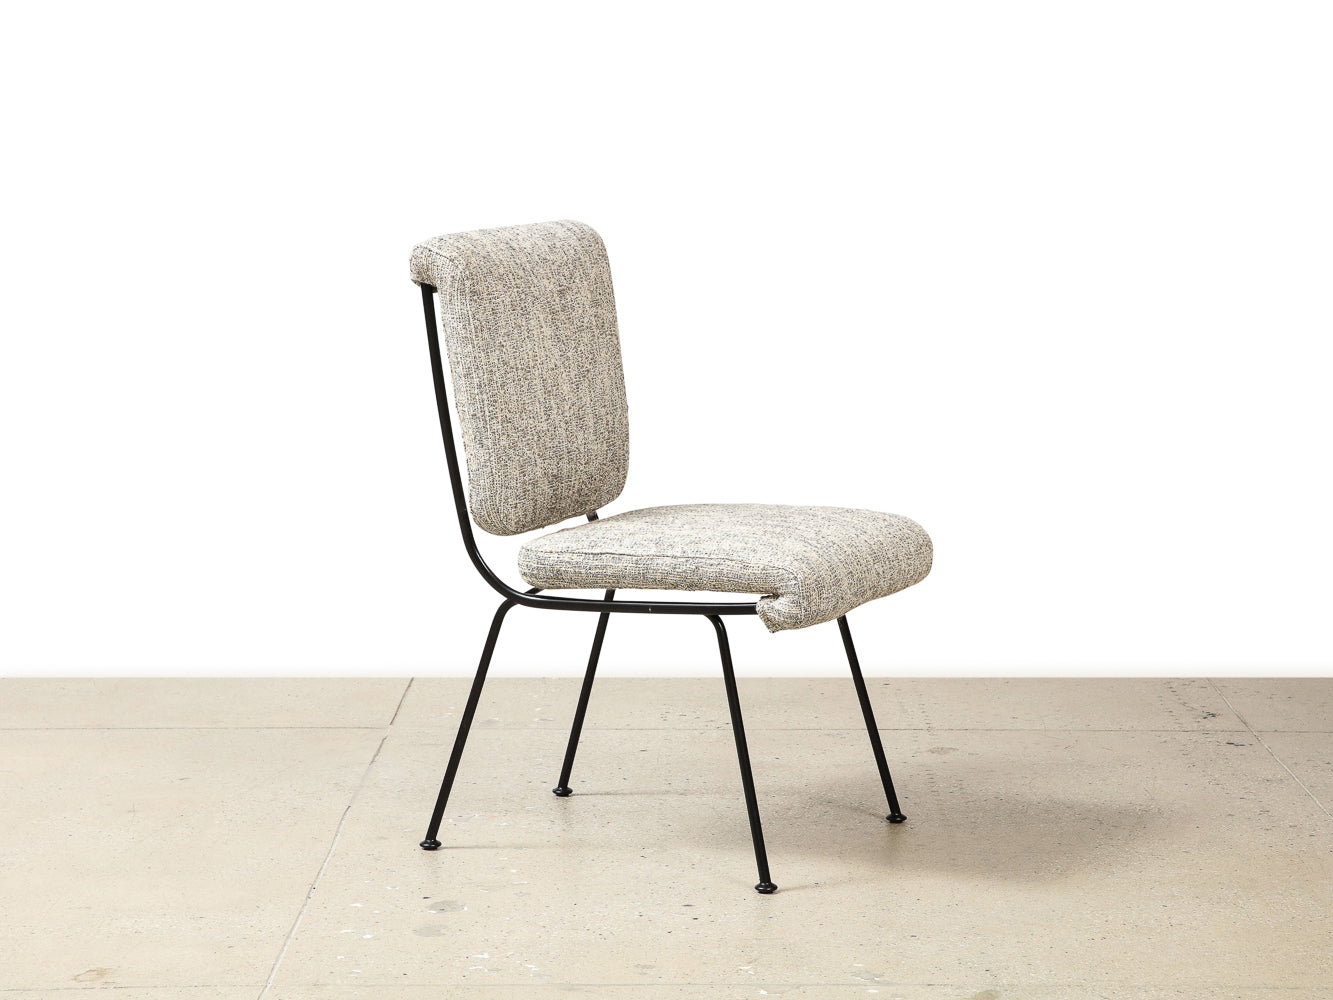 Floating Dining Chair by Donzella, LTD.